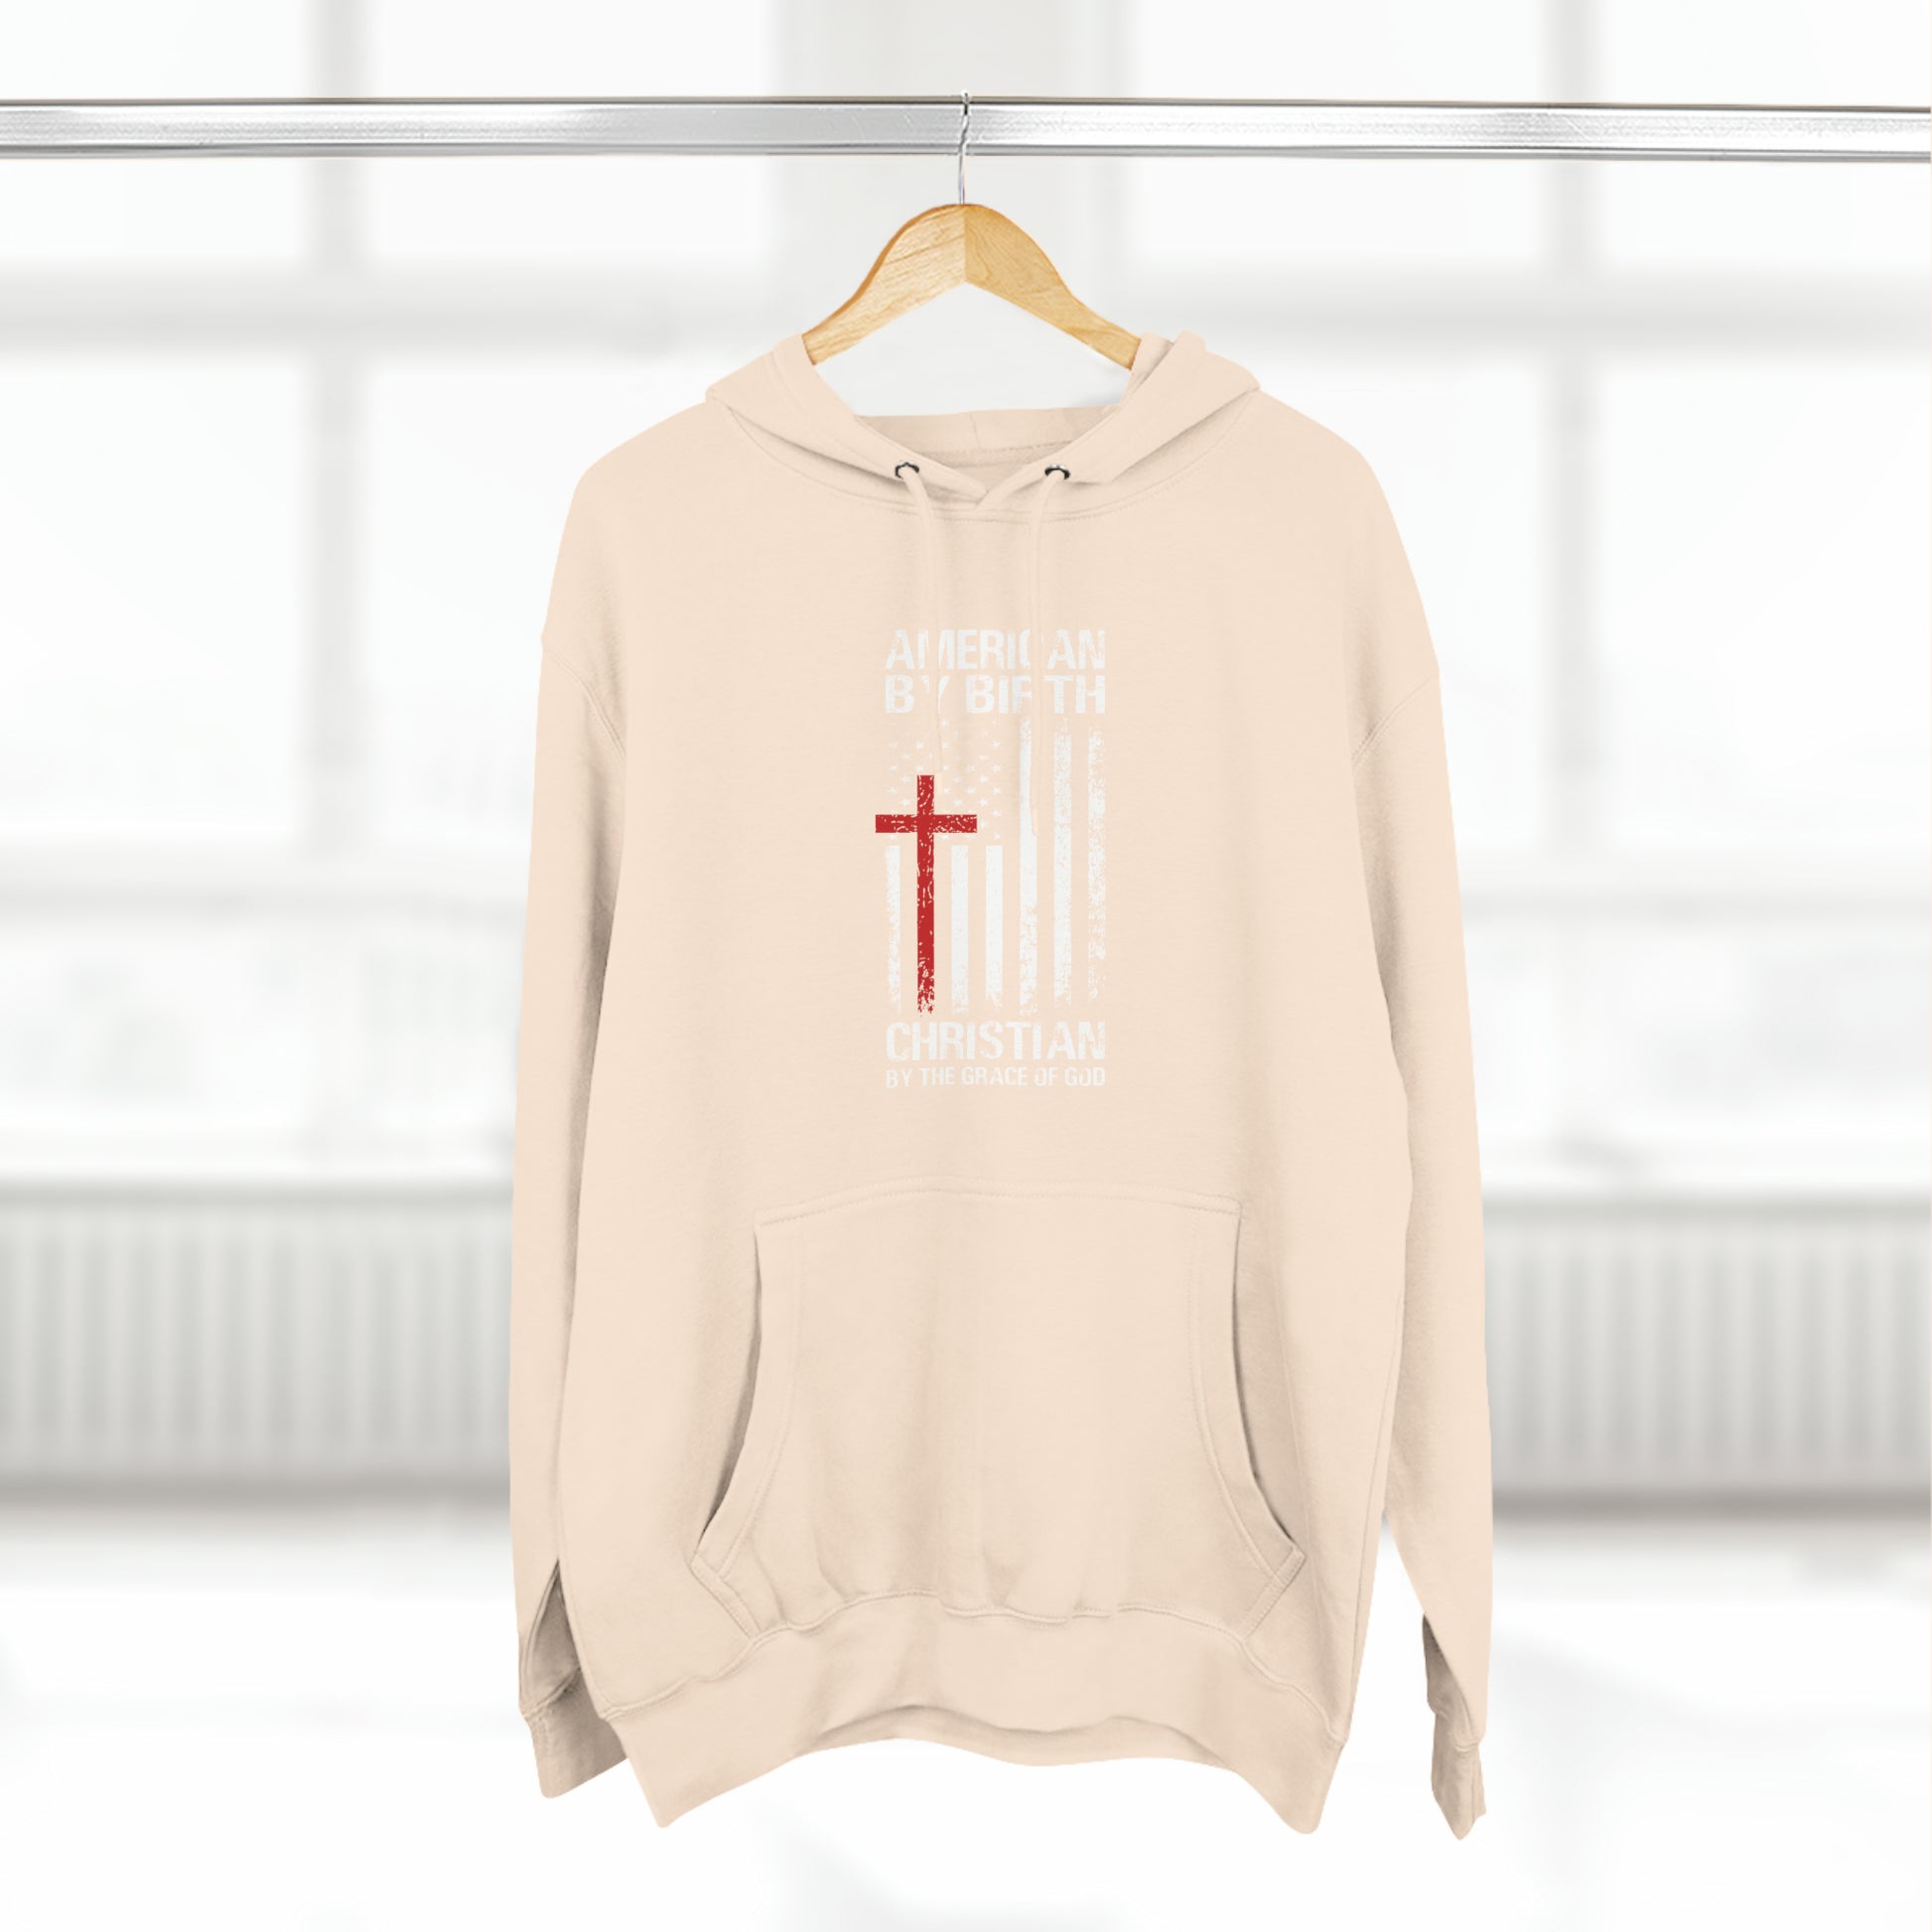 "American Christian" Hoodie - Weave Got Gifts - Unique Gifts You Won’t Find Anywhere Else!